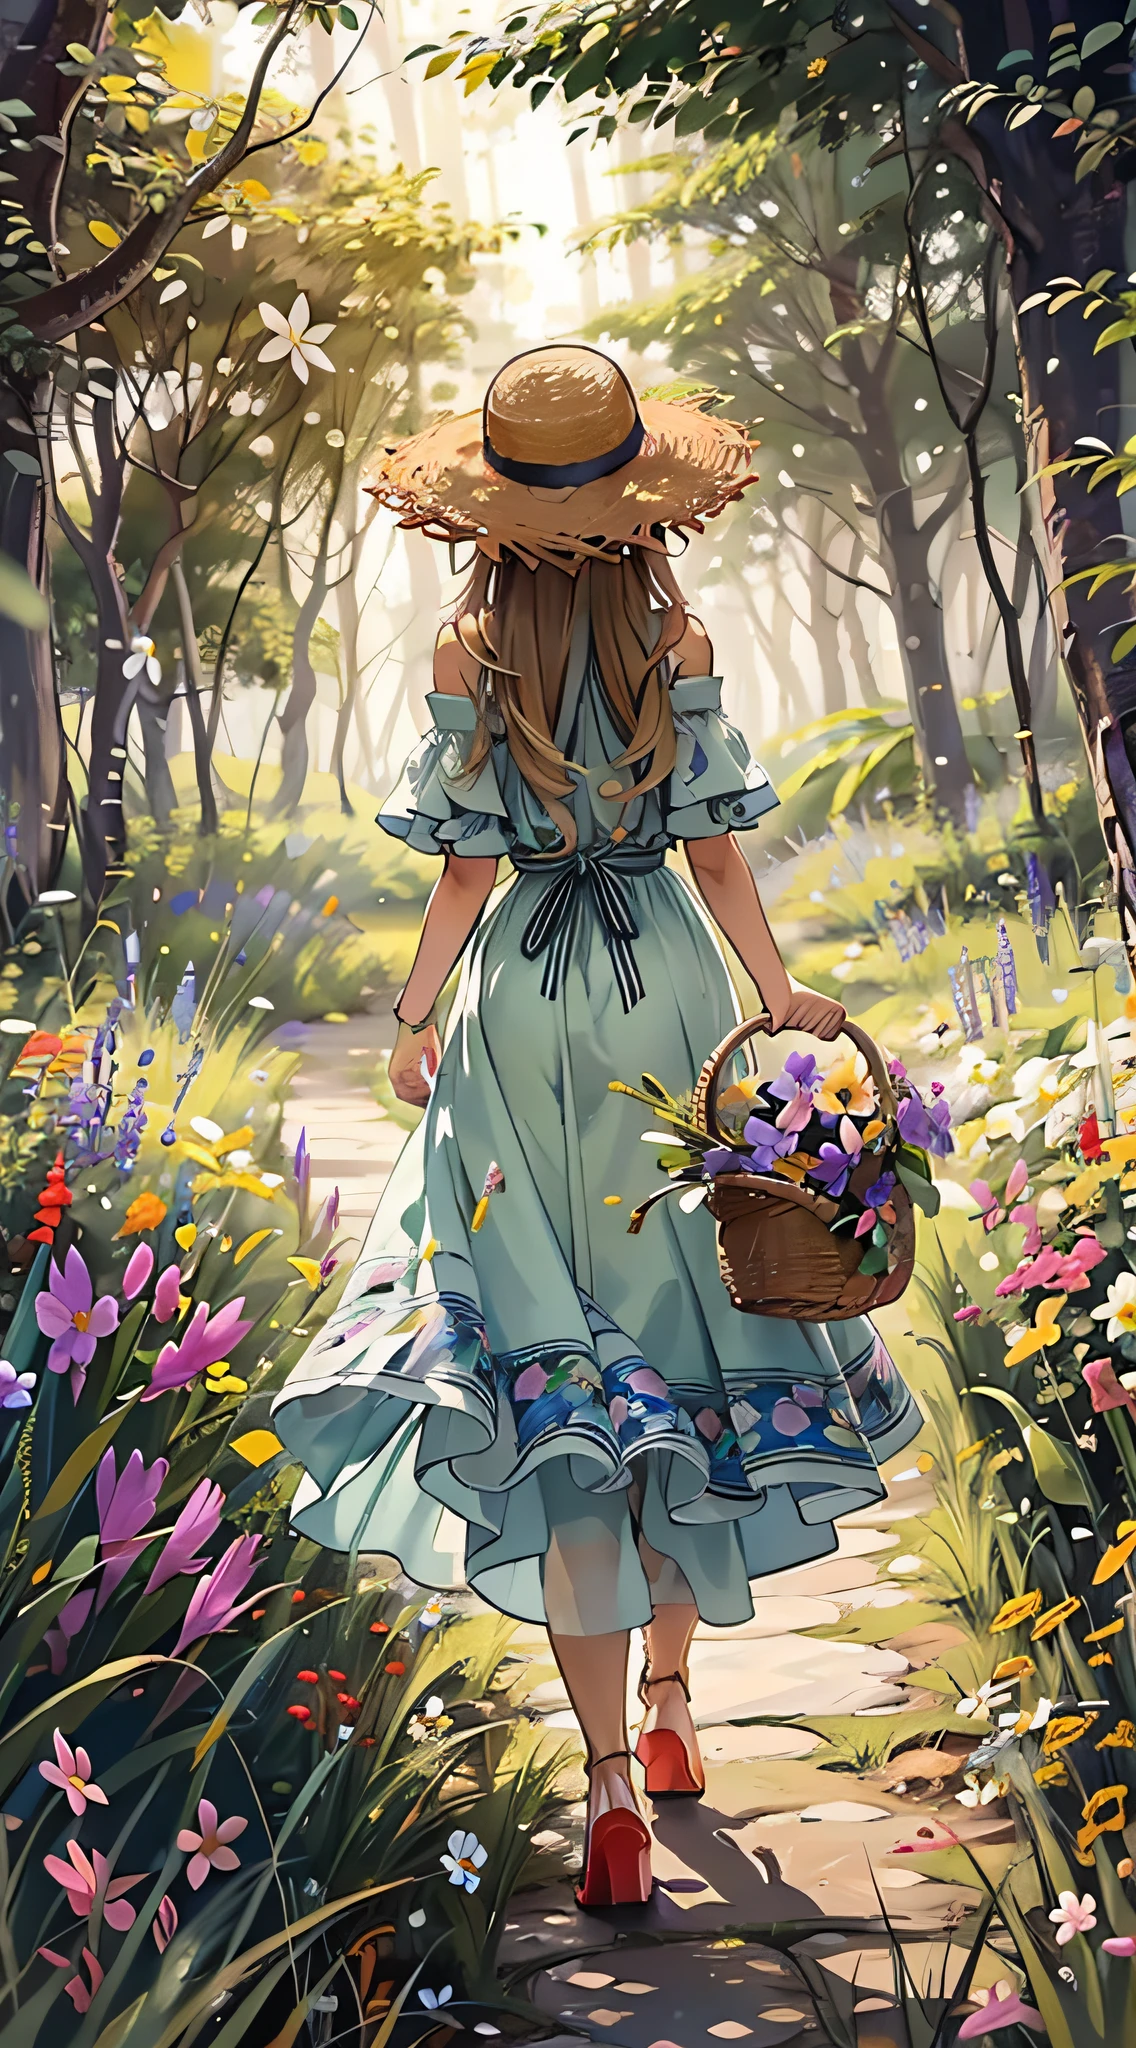 There is a back view of a beautiful girl with a basket walking on a grass path in a dimly lit forest、She wears a straw hat and uses it as a floral hair ornament、At the exit of the forest where she is walking, you can see a paradise of flowers spreading out in the dazzling light.、Looks Back、Masterpiece